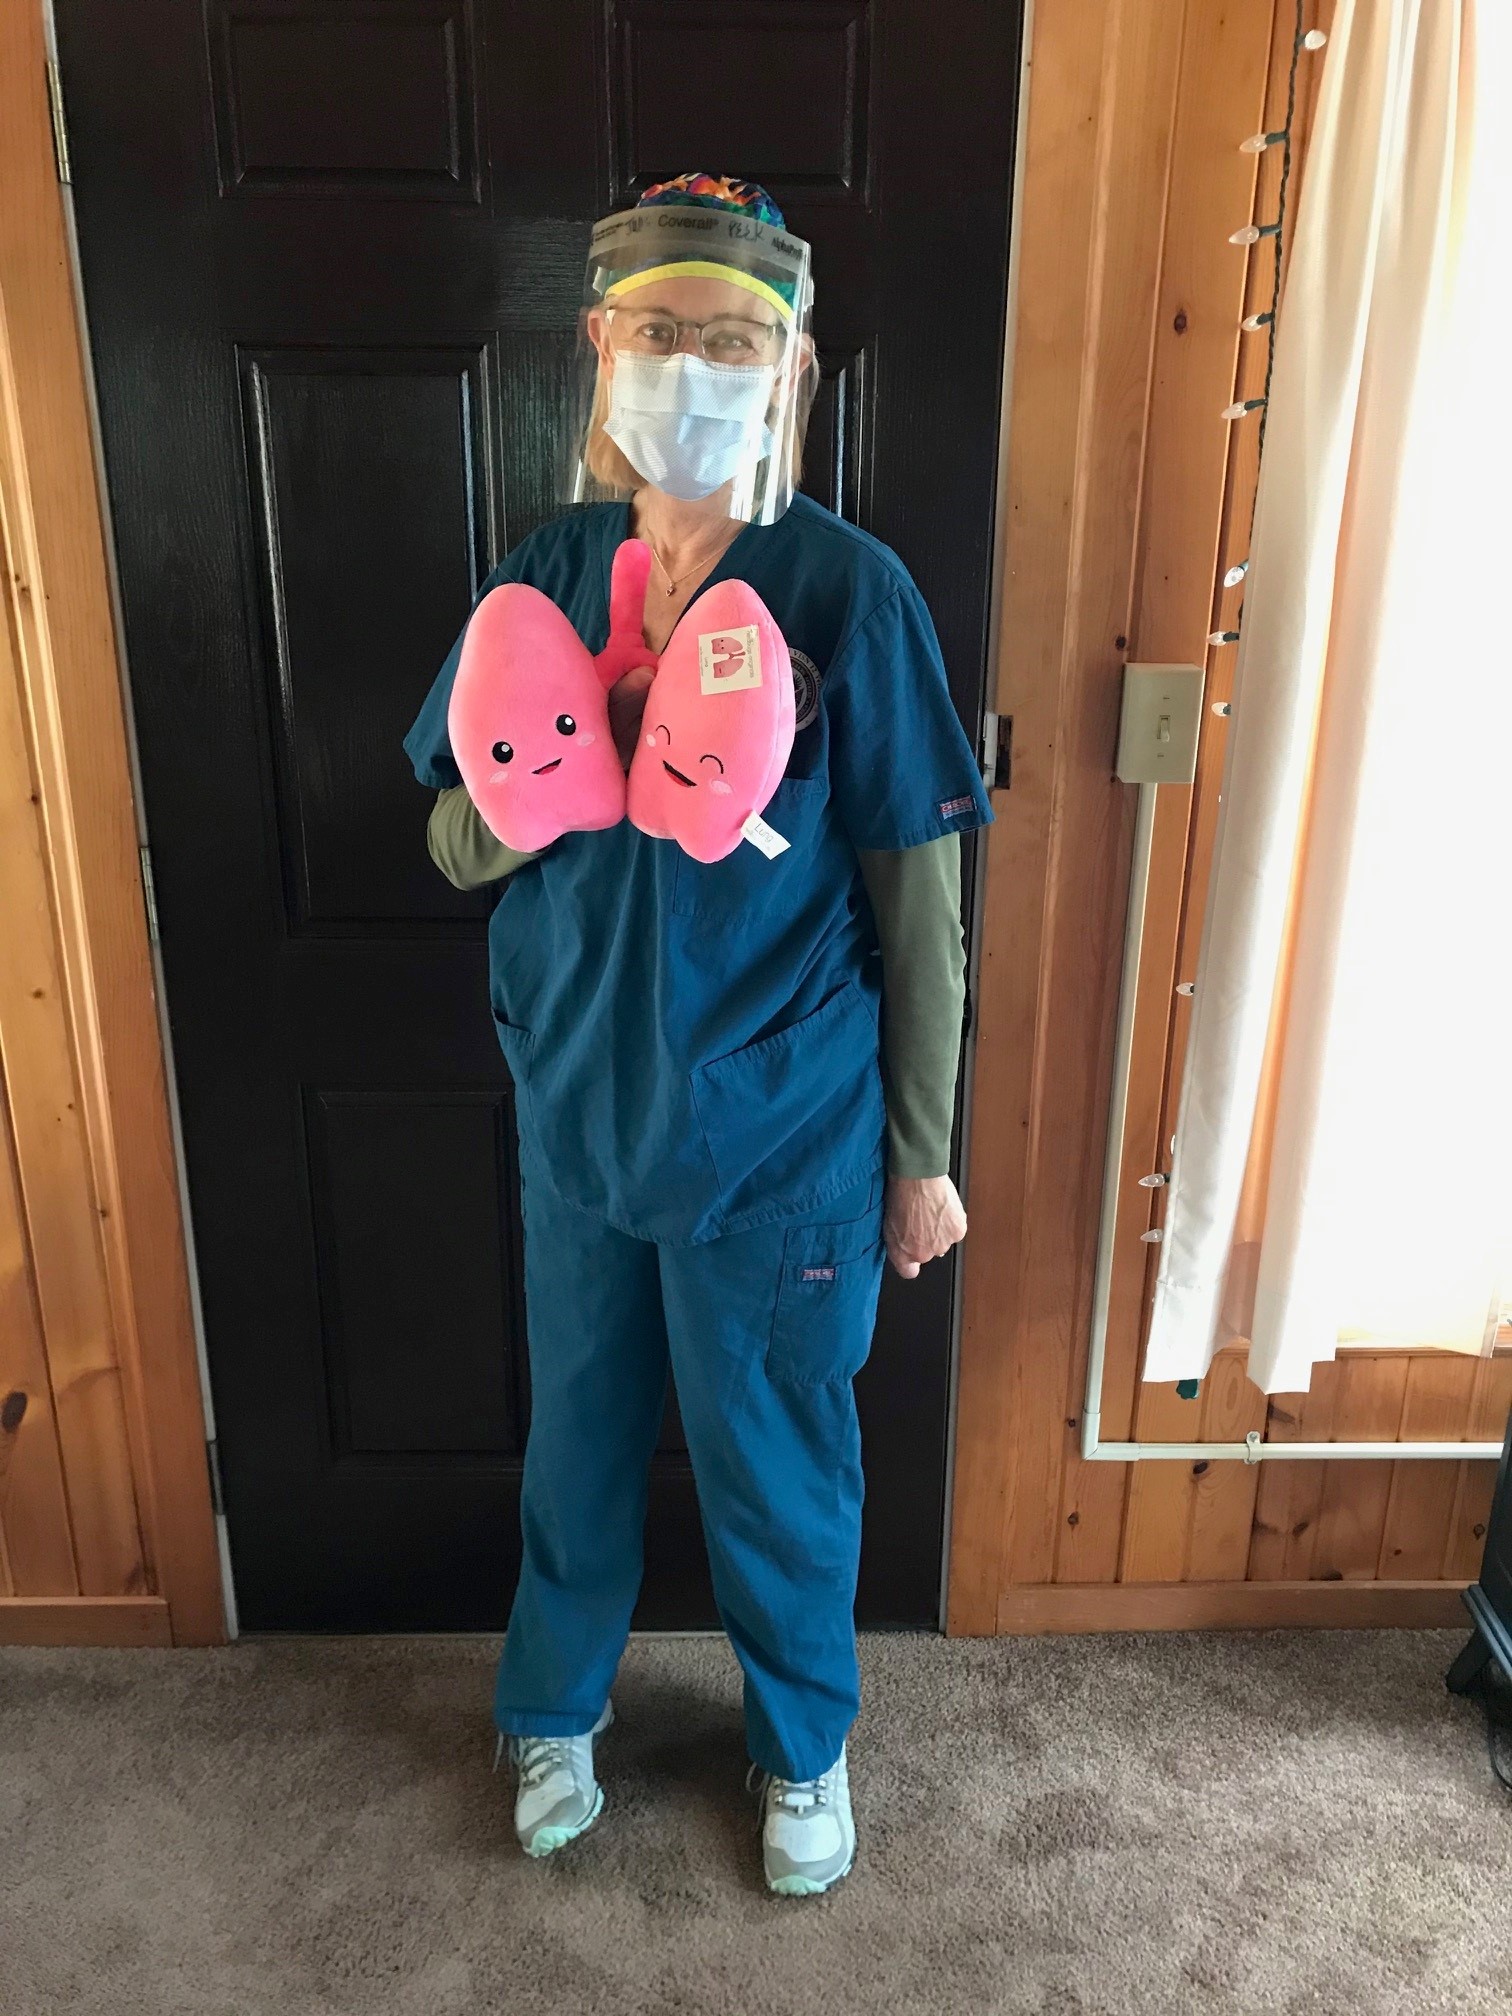 Julia Peek in scrubs and a face mask holds toy lungs